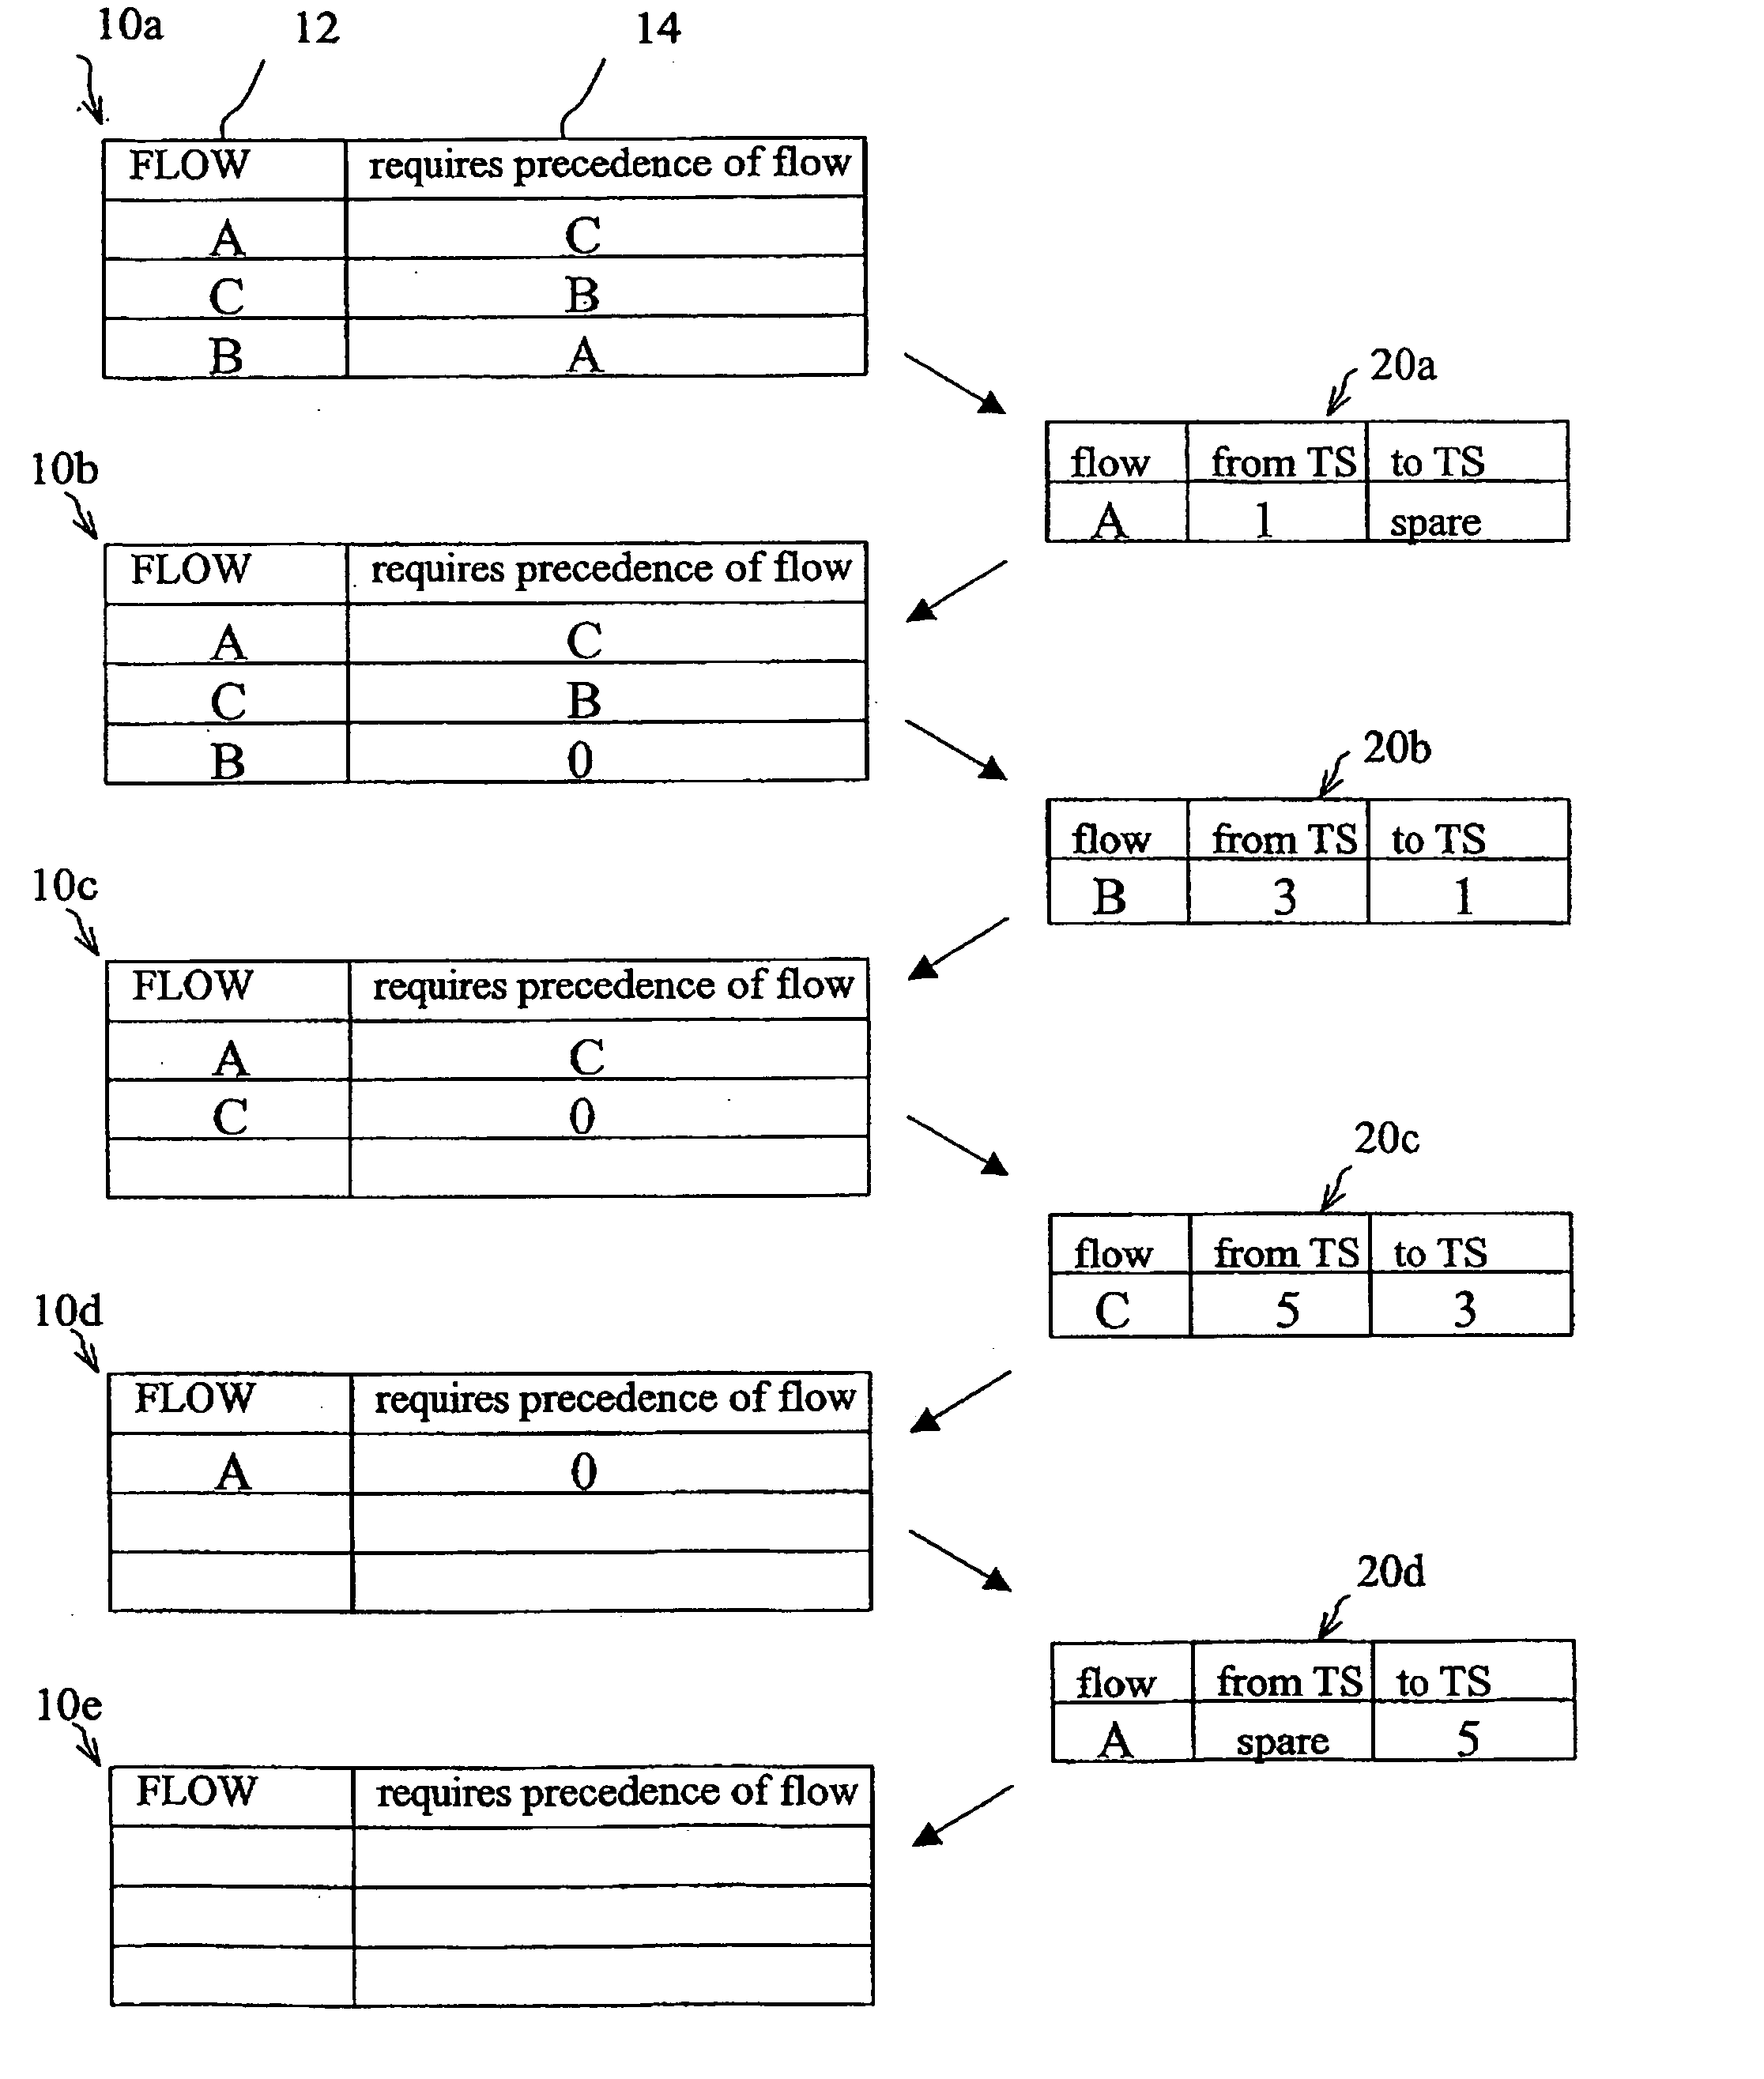 Procedure for sorting flows in a transport network carrying circuit data flows